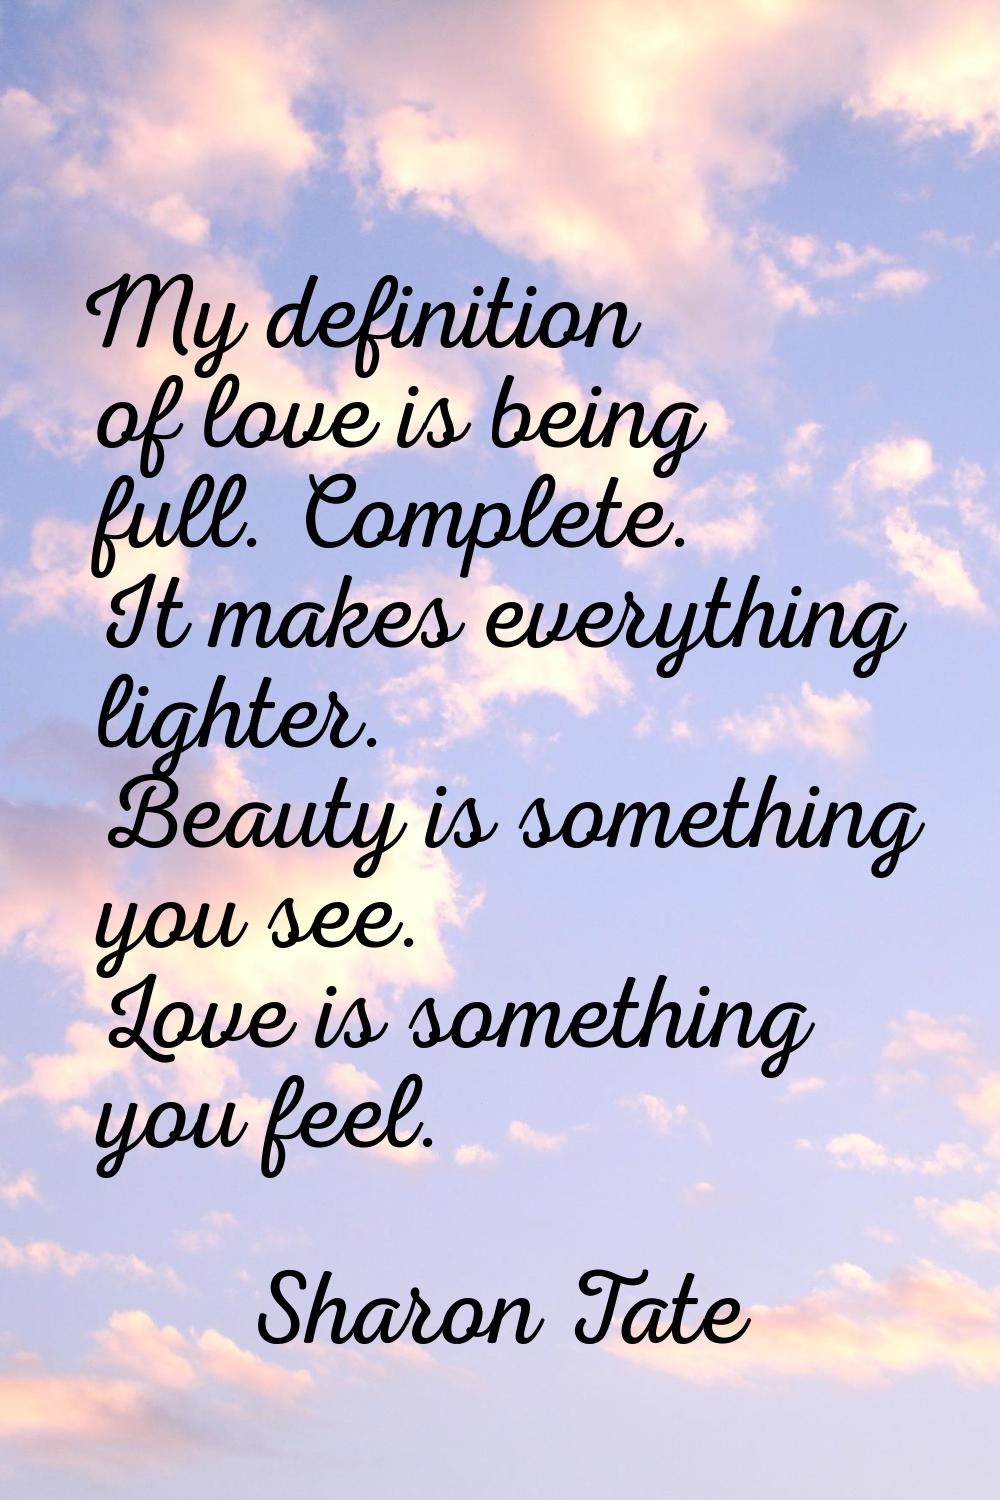 My definition of love is being full. Complete. It makes everything lighter. Beauty is something you